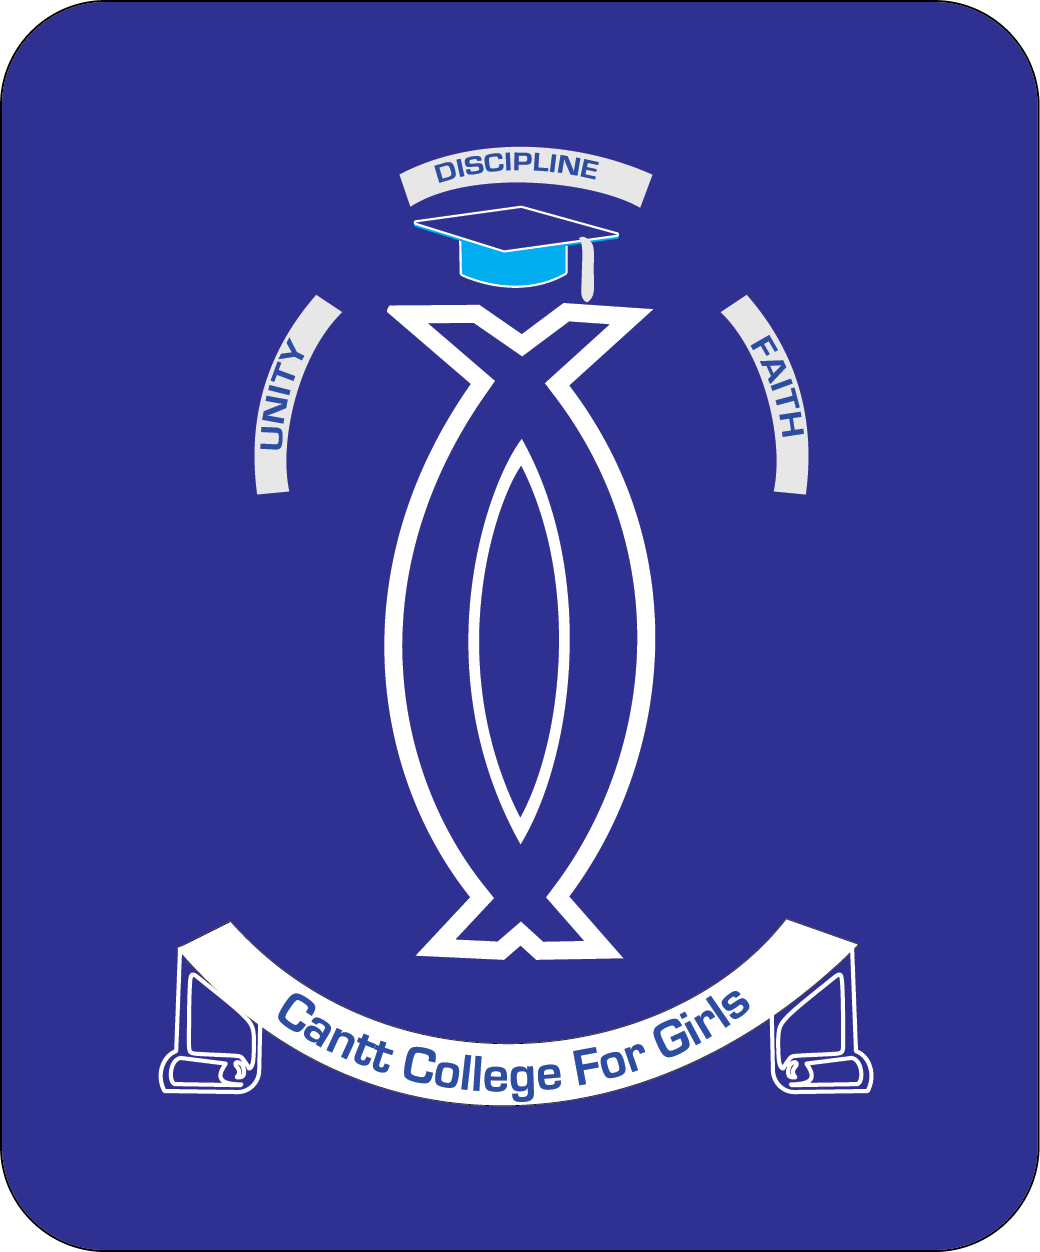 Cantt College for Girls